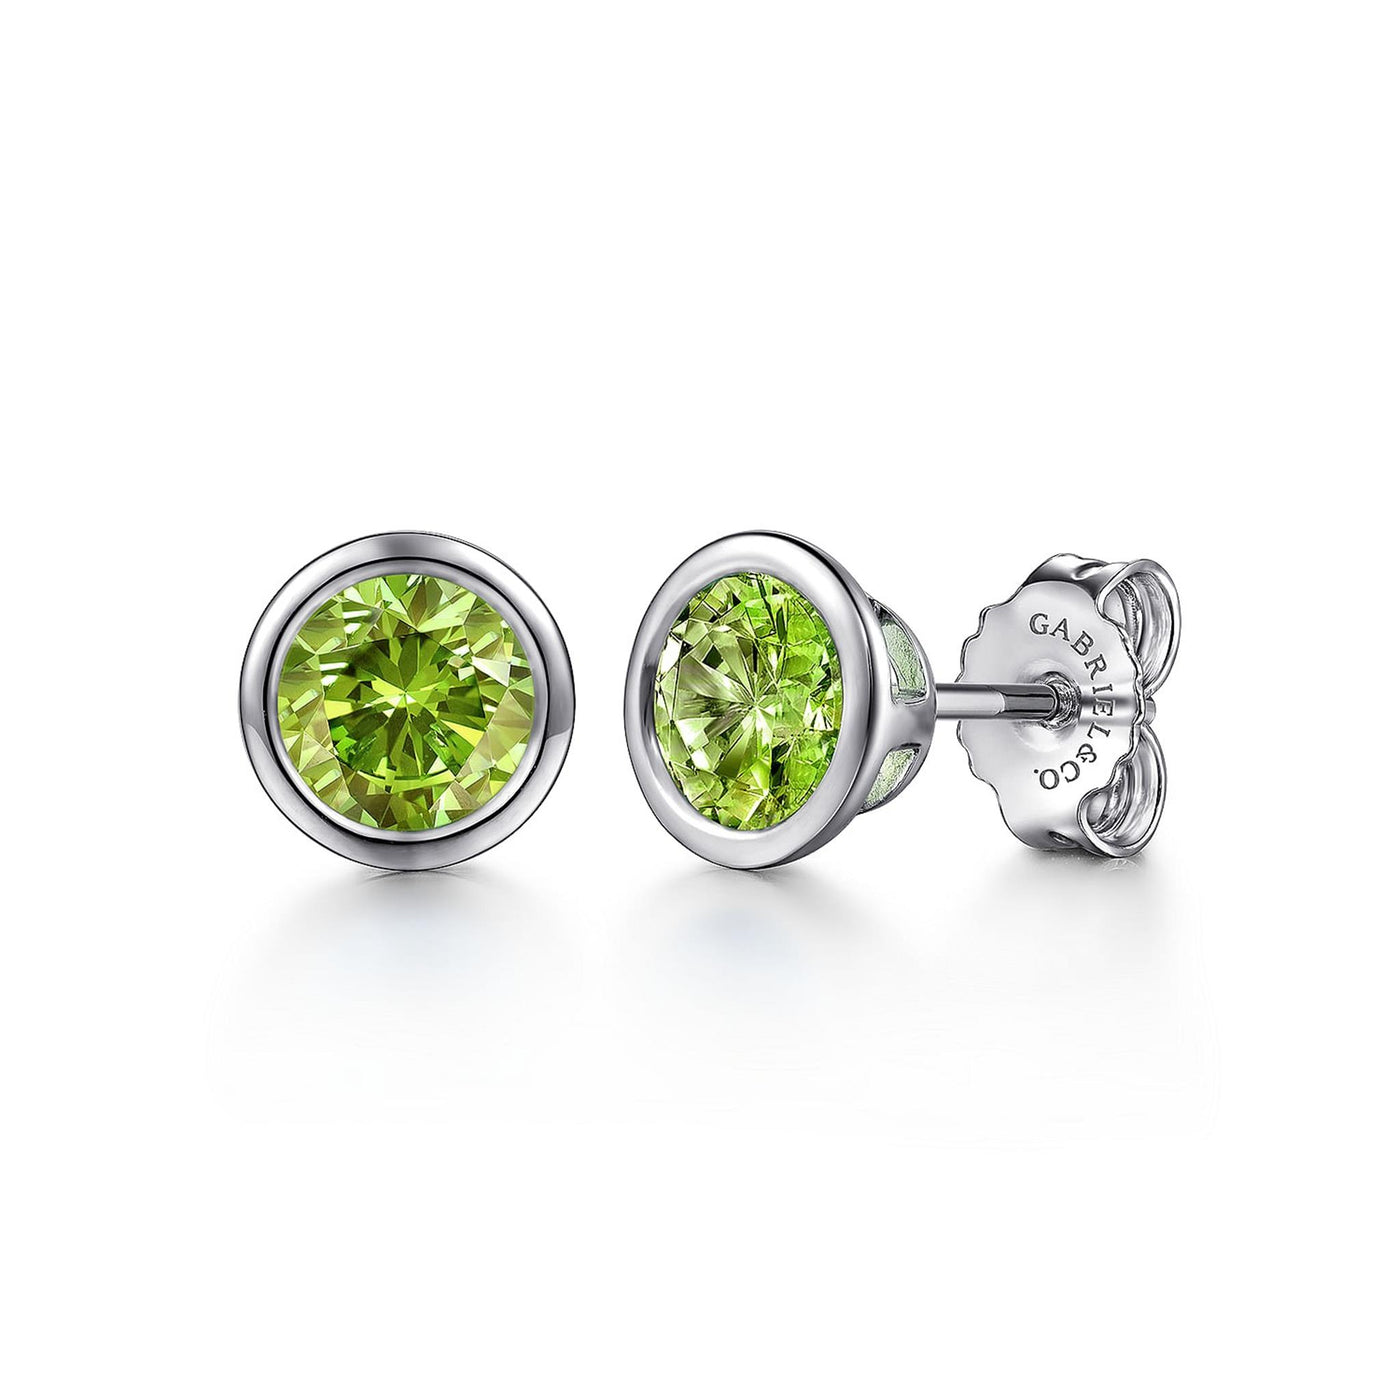 Sterling Silver 1.93ctw Solitaire Bezel Style Round Peridot Earrings